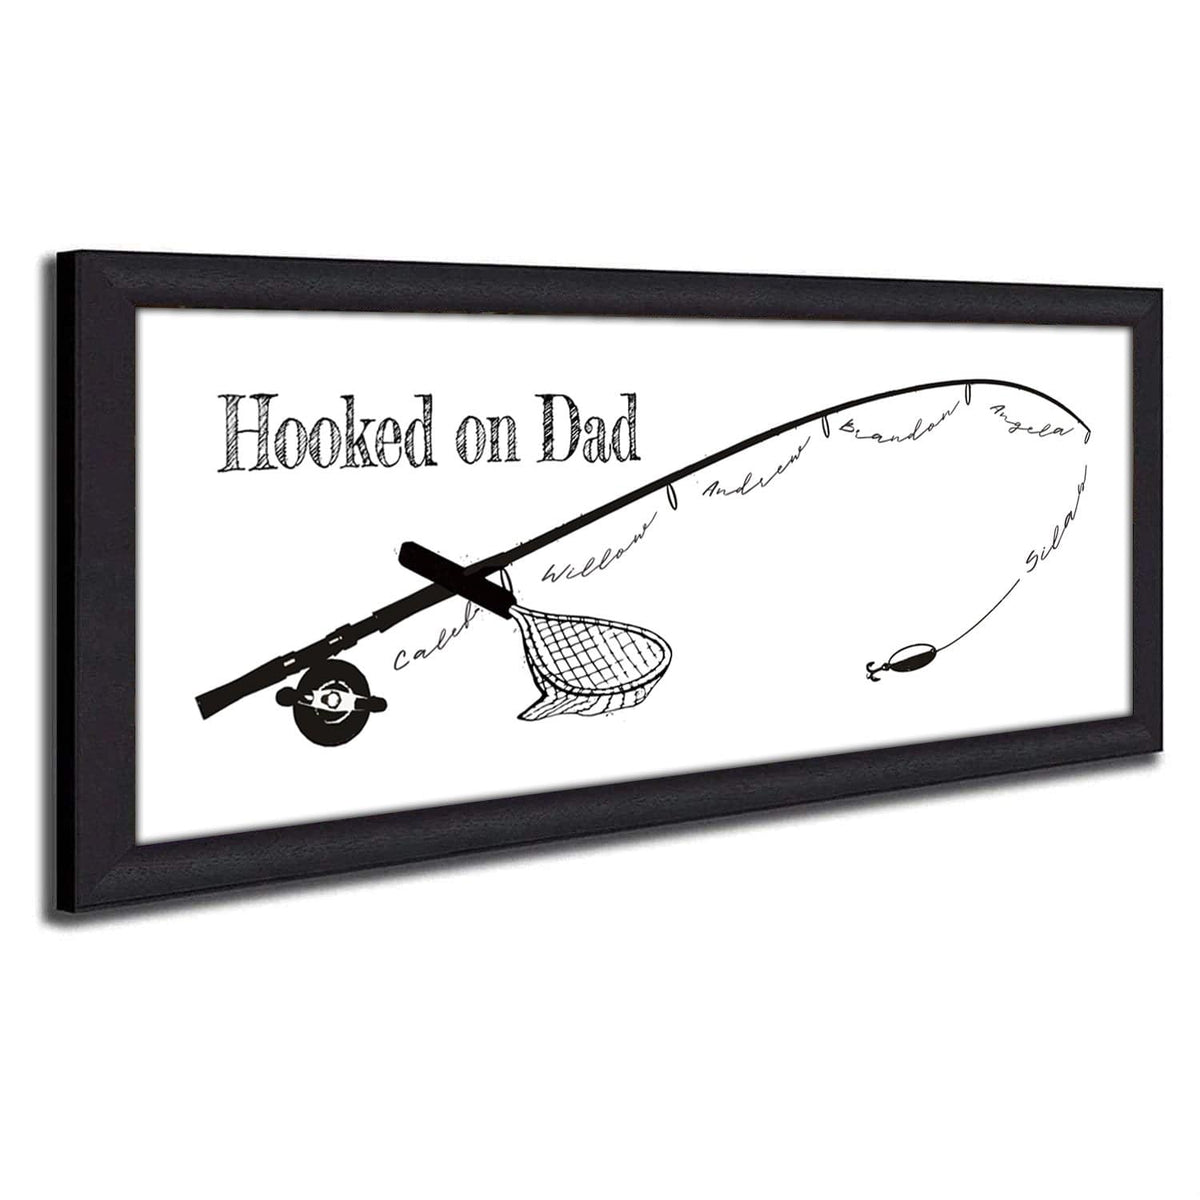 Hooked on Dad - B&W, Customized Fishing Pole Art With Children's Names - Father's  Day Gift - Personal-Prints